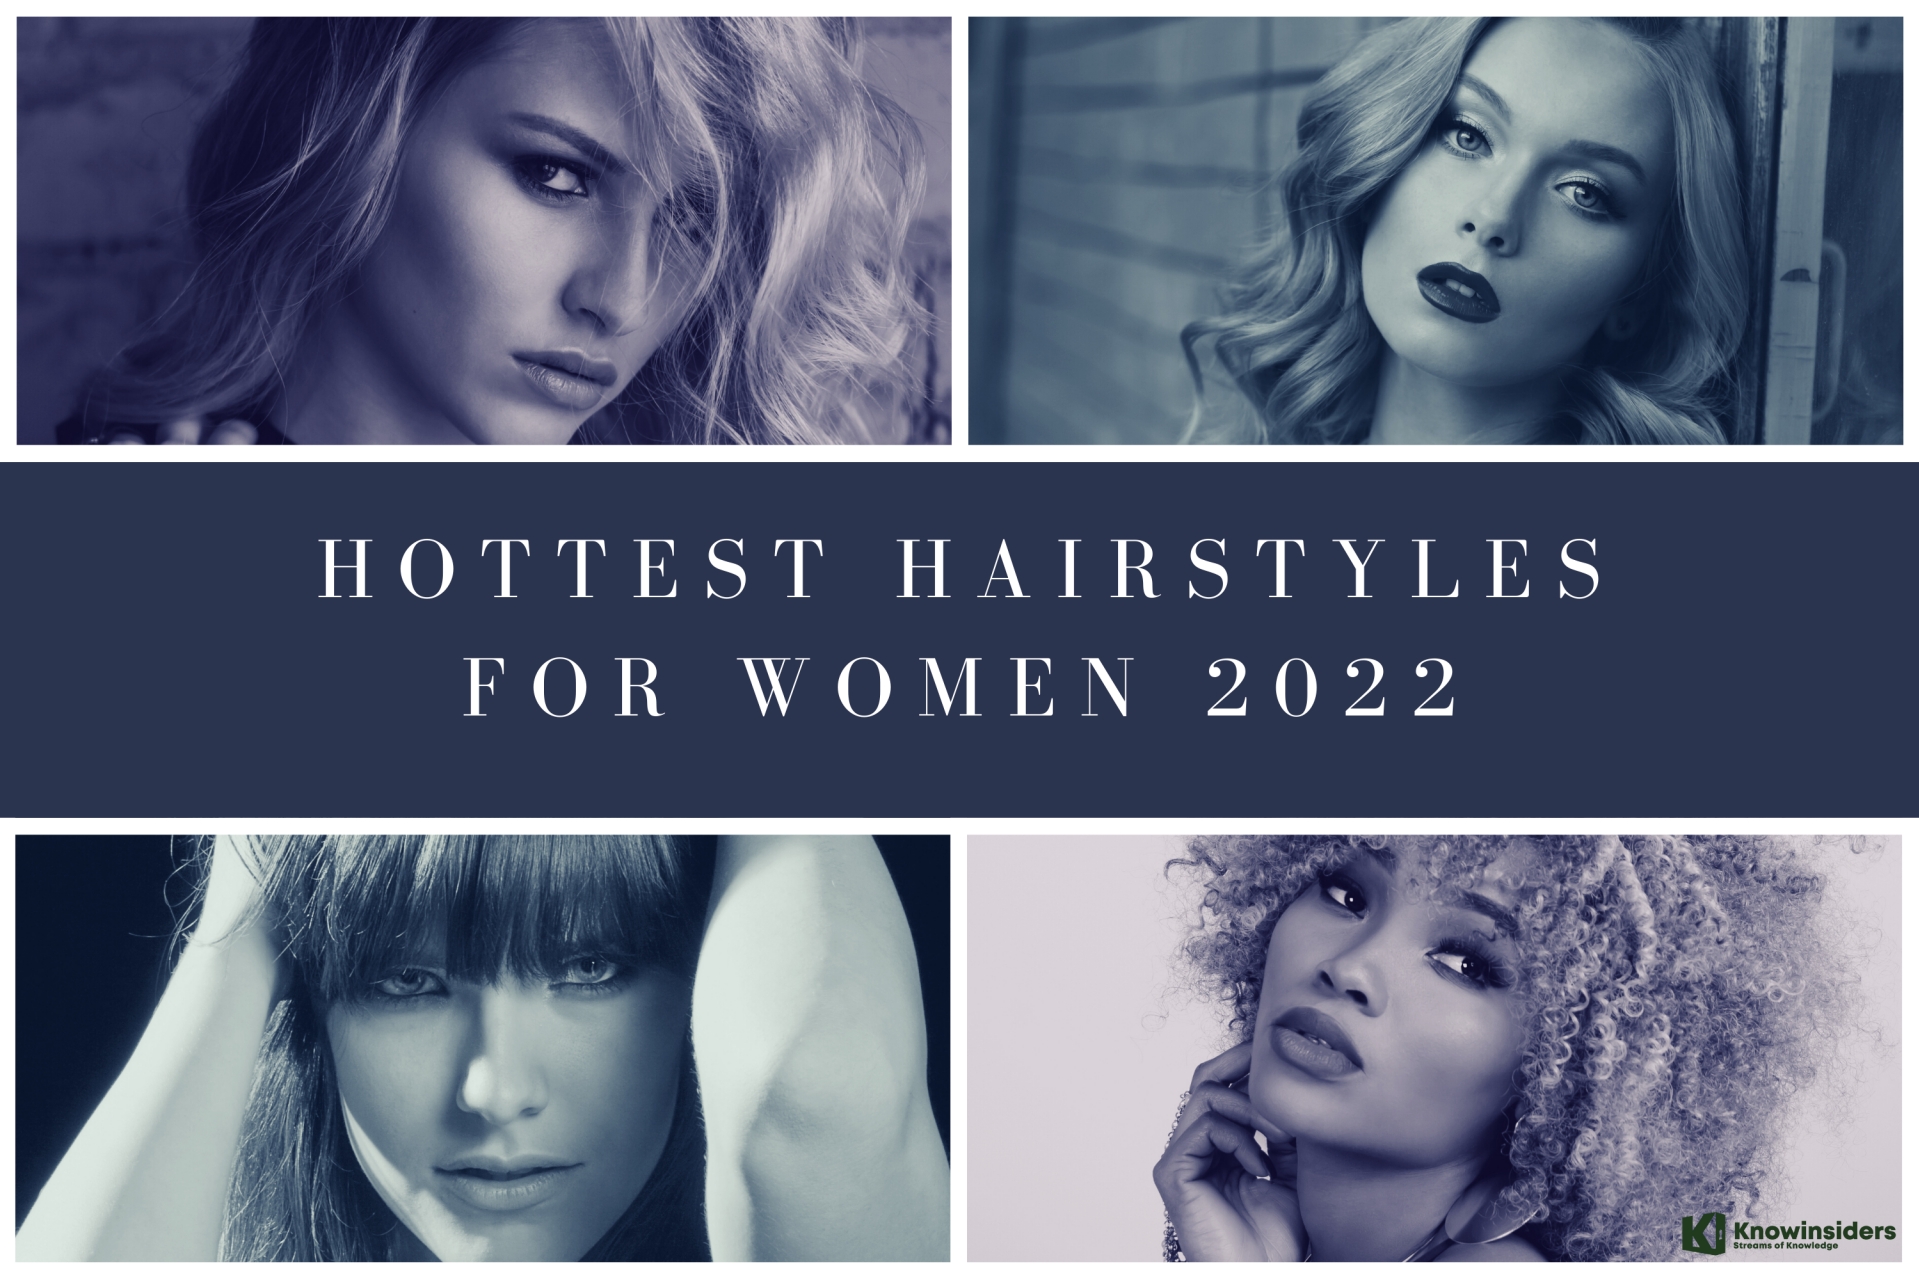 10 Hottest Hairstyles For Women In 2022